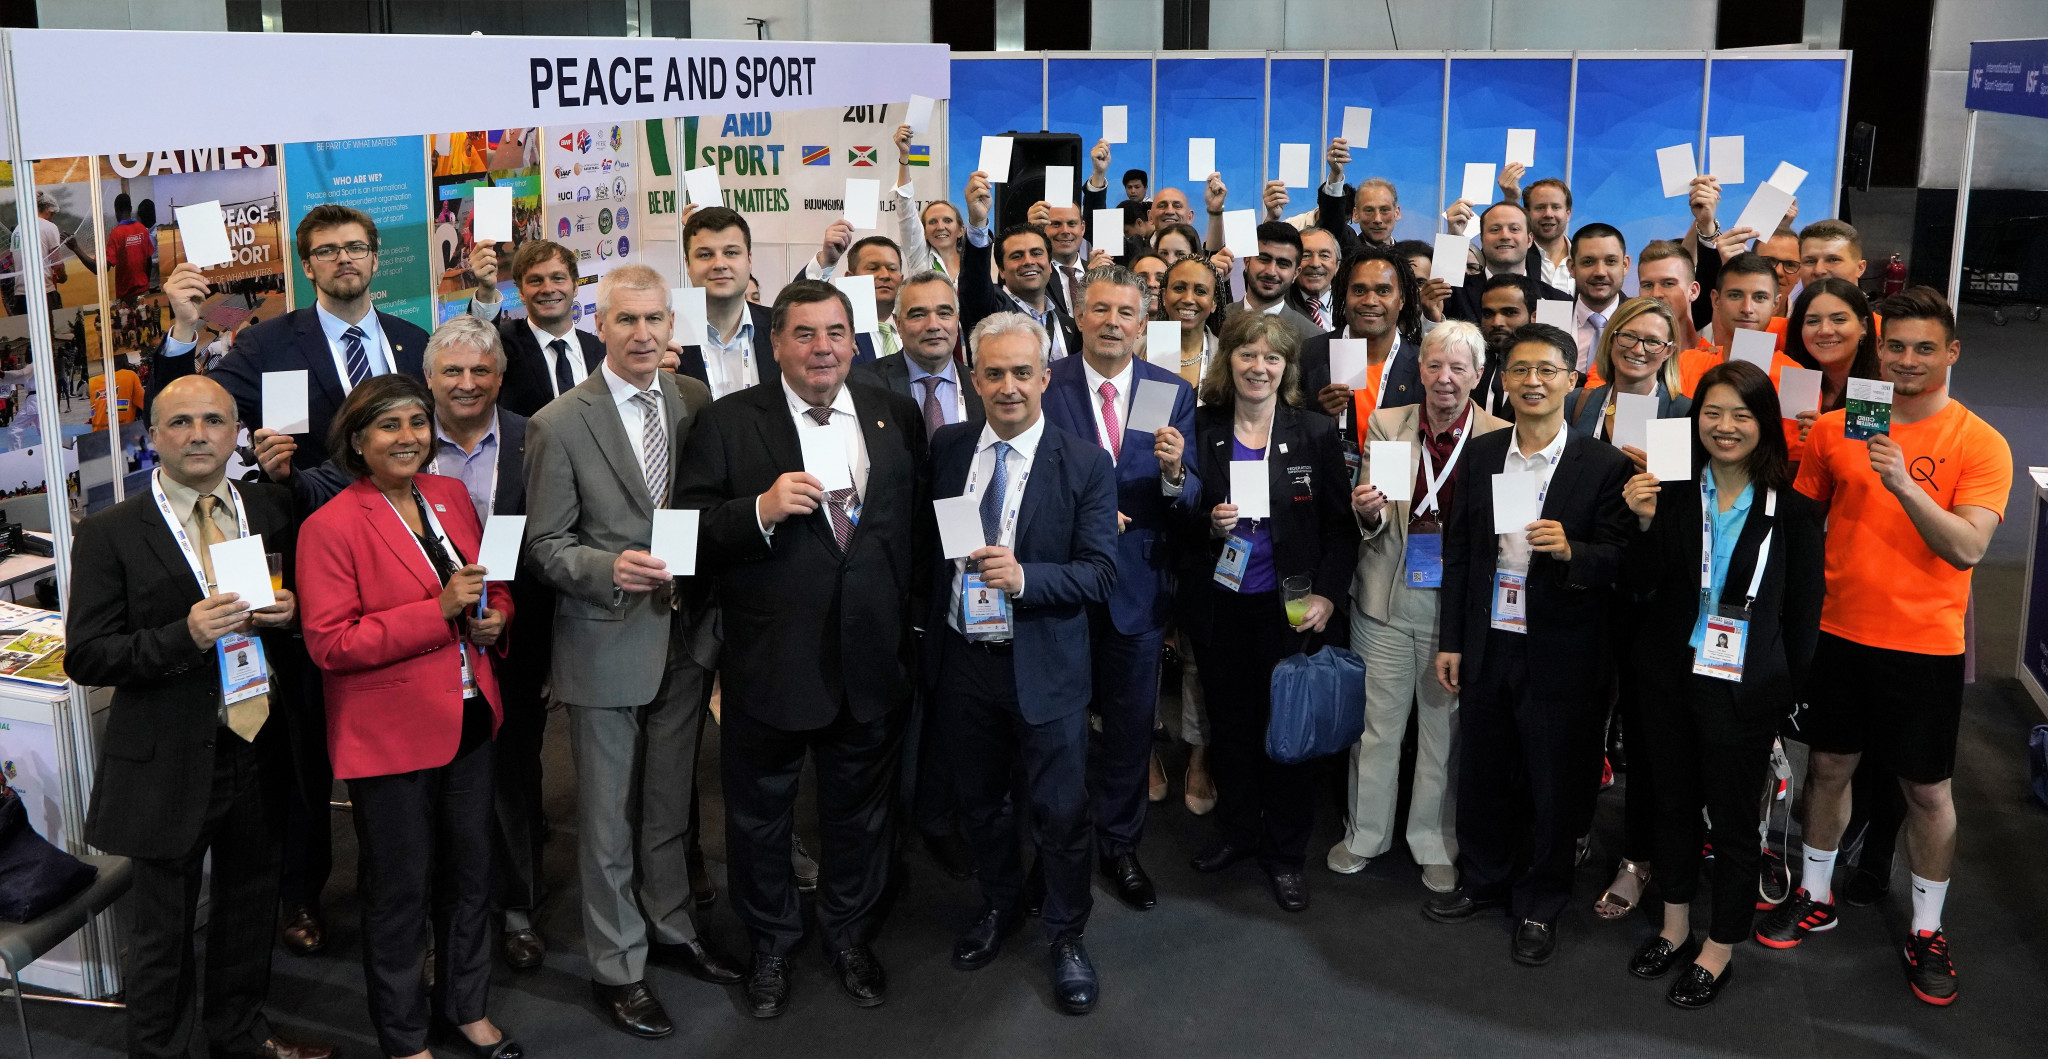 SportAccord Summit participants, including International Federation Presidents, have been visiting the Peace and Sport booth and showing their support for the #WhiteCard campaign ©Peace and Sport